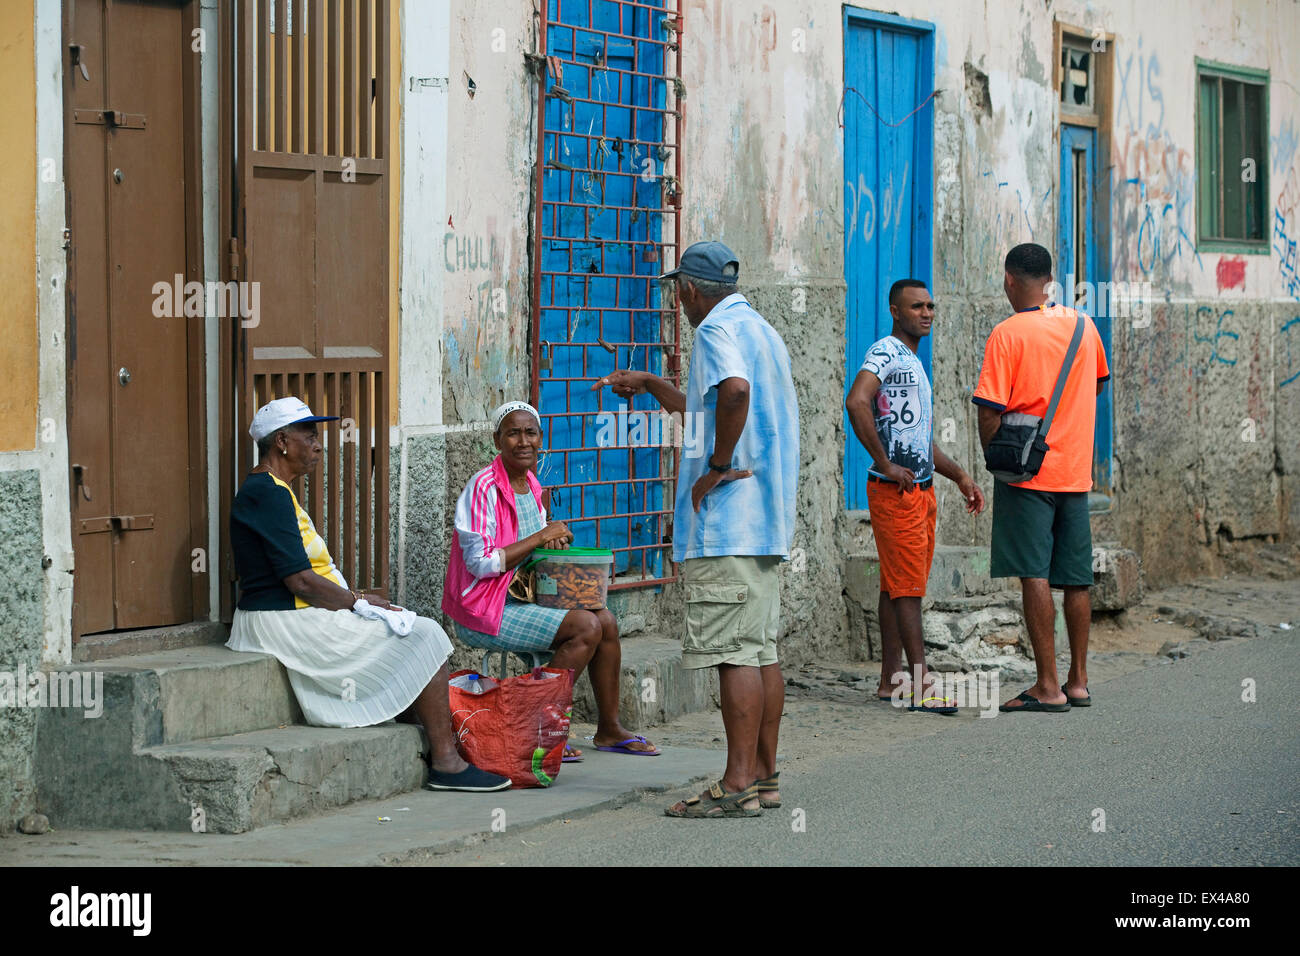 Creole people in the old colonial historic center of Mindelo on the island São Vicente, Cape Verde / Cabo Verde, Western Africa Stock Photo